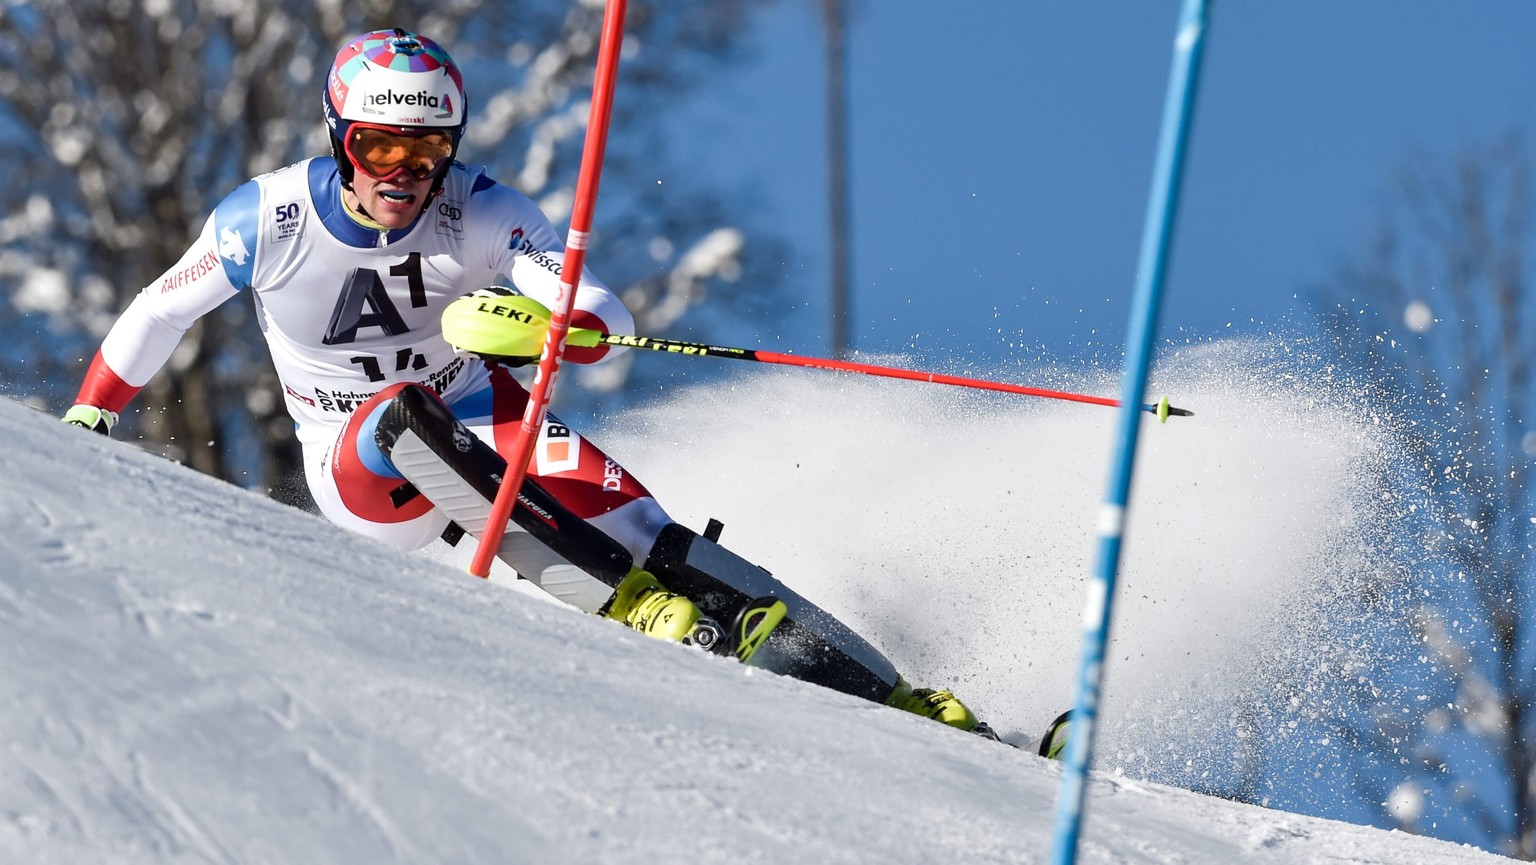 epa05741128 Daniel Yule of Switzerland clears a gate during the first run of the Men&#039;s Slalom race at the FIS Alpine Skiing World Cup in Kitzbuehel, Austria, 22 January 2017. EPA/ANGELIKA WARMUTH